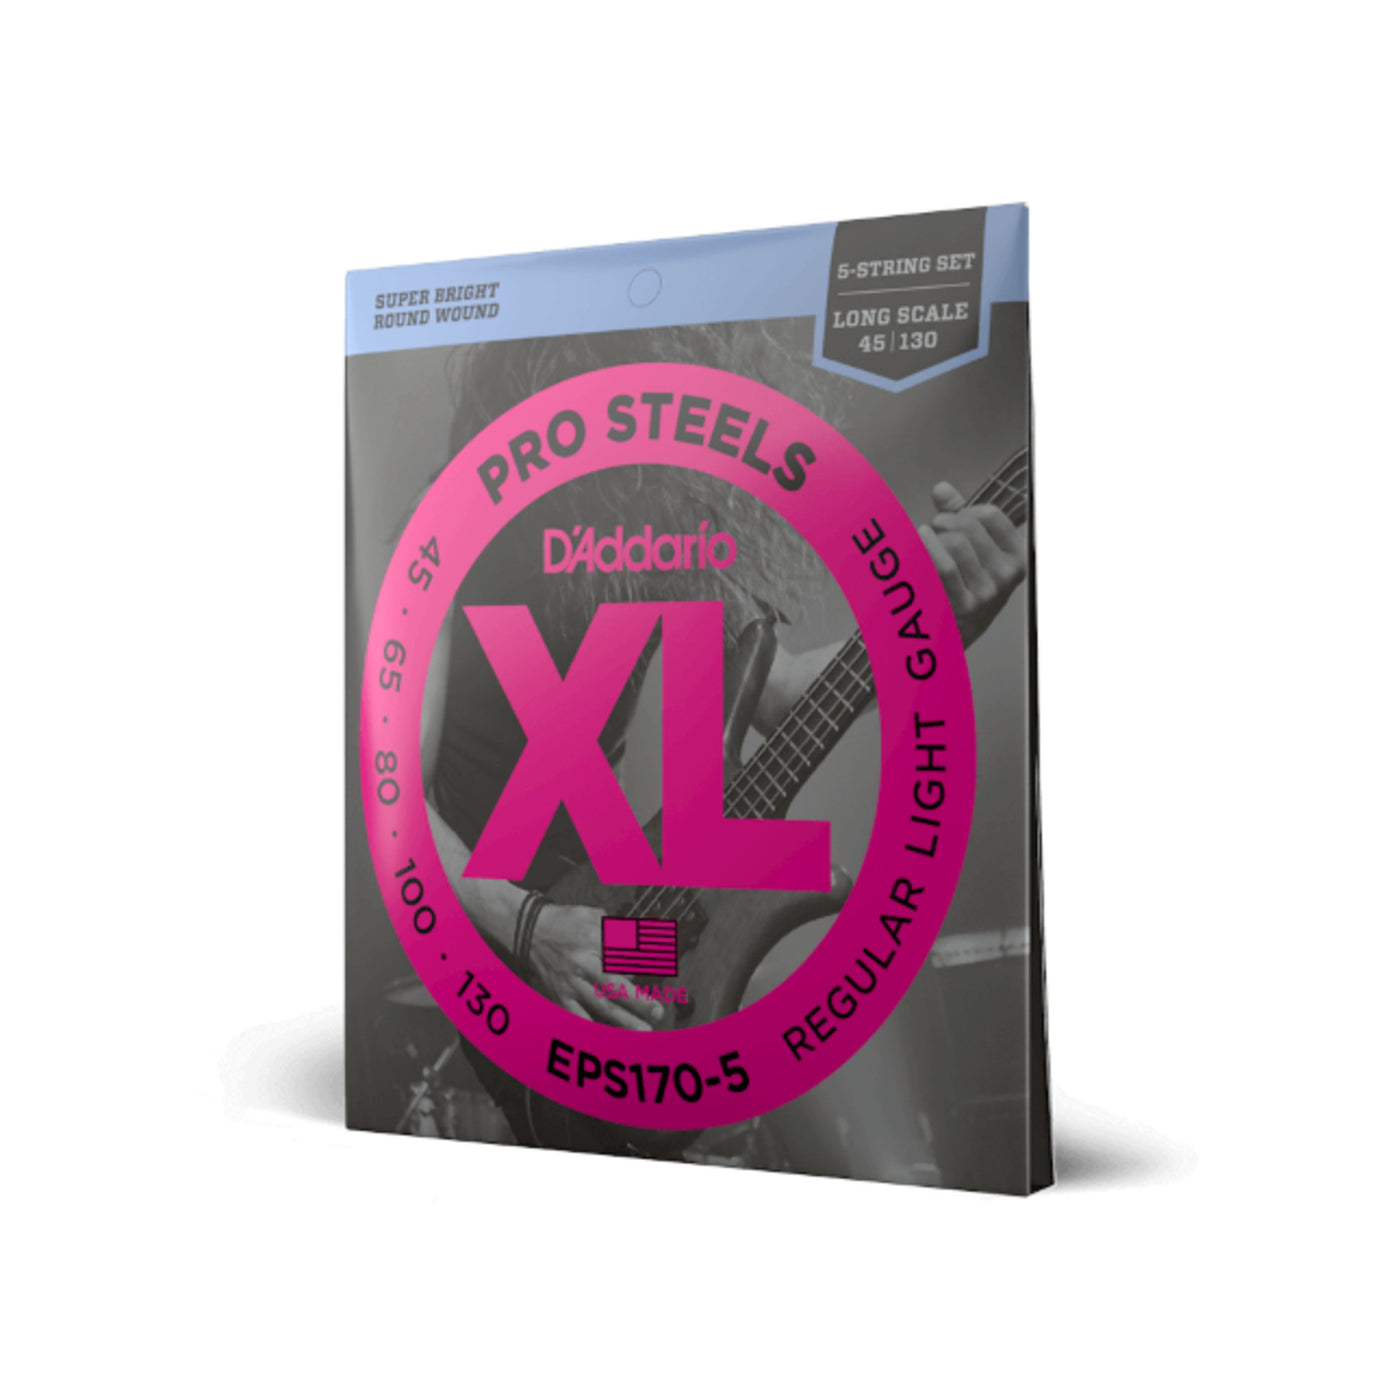 D'Addario 5-String ProSteels Bass Guitar Strings, Light, 45-130, Long Scale (EPS170-5)